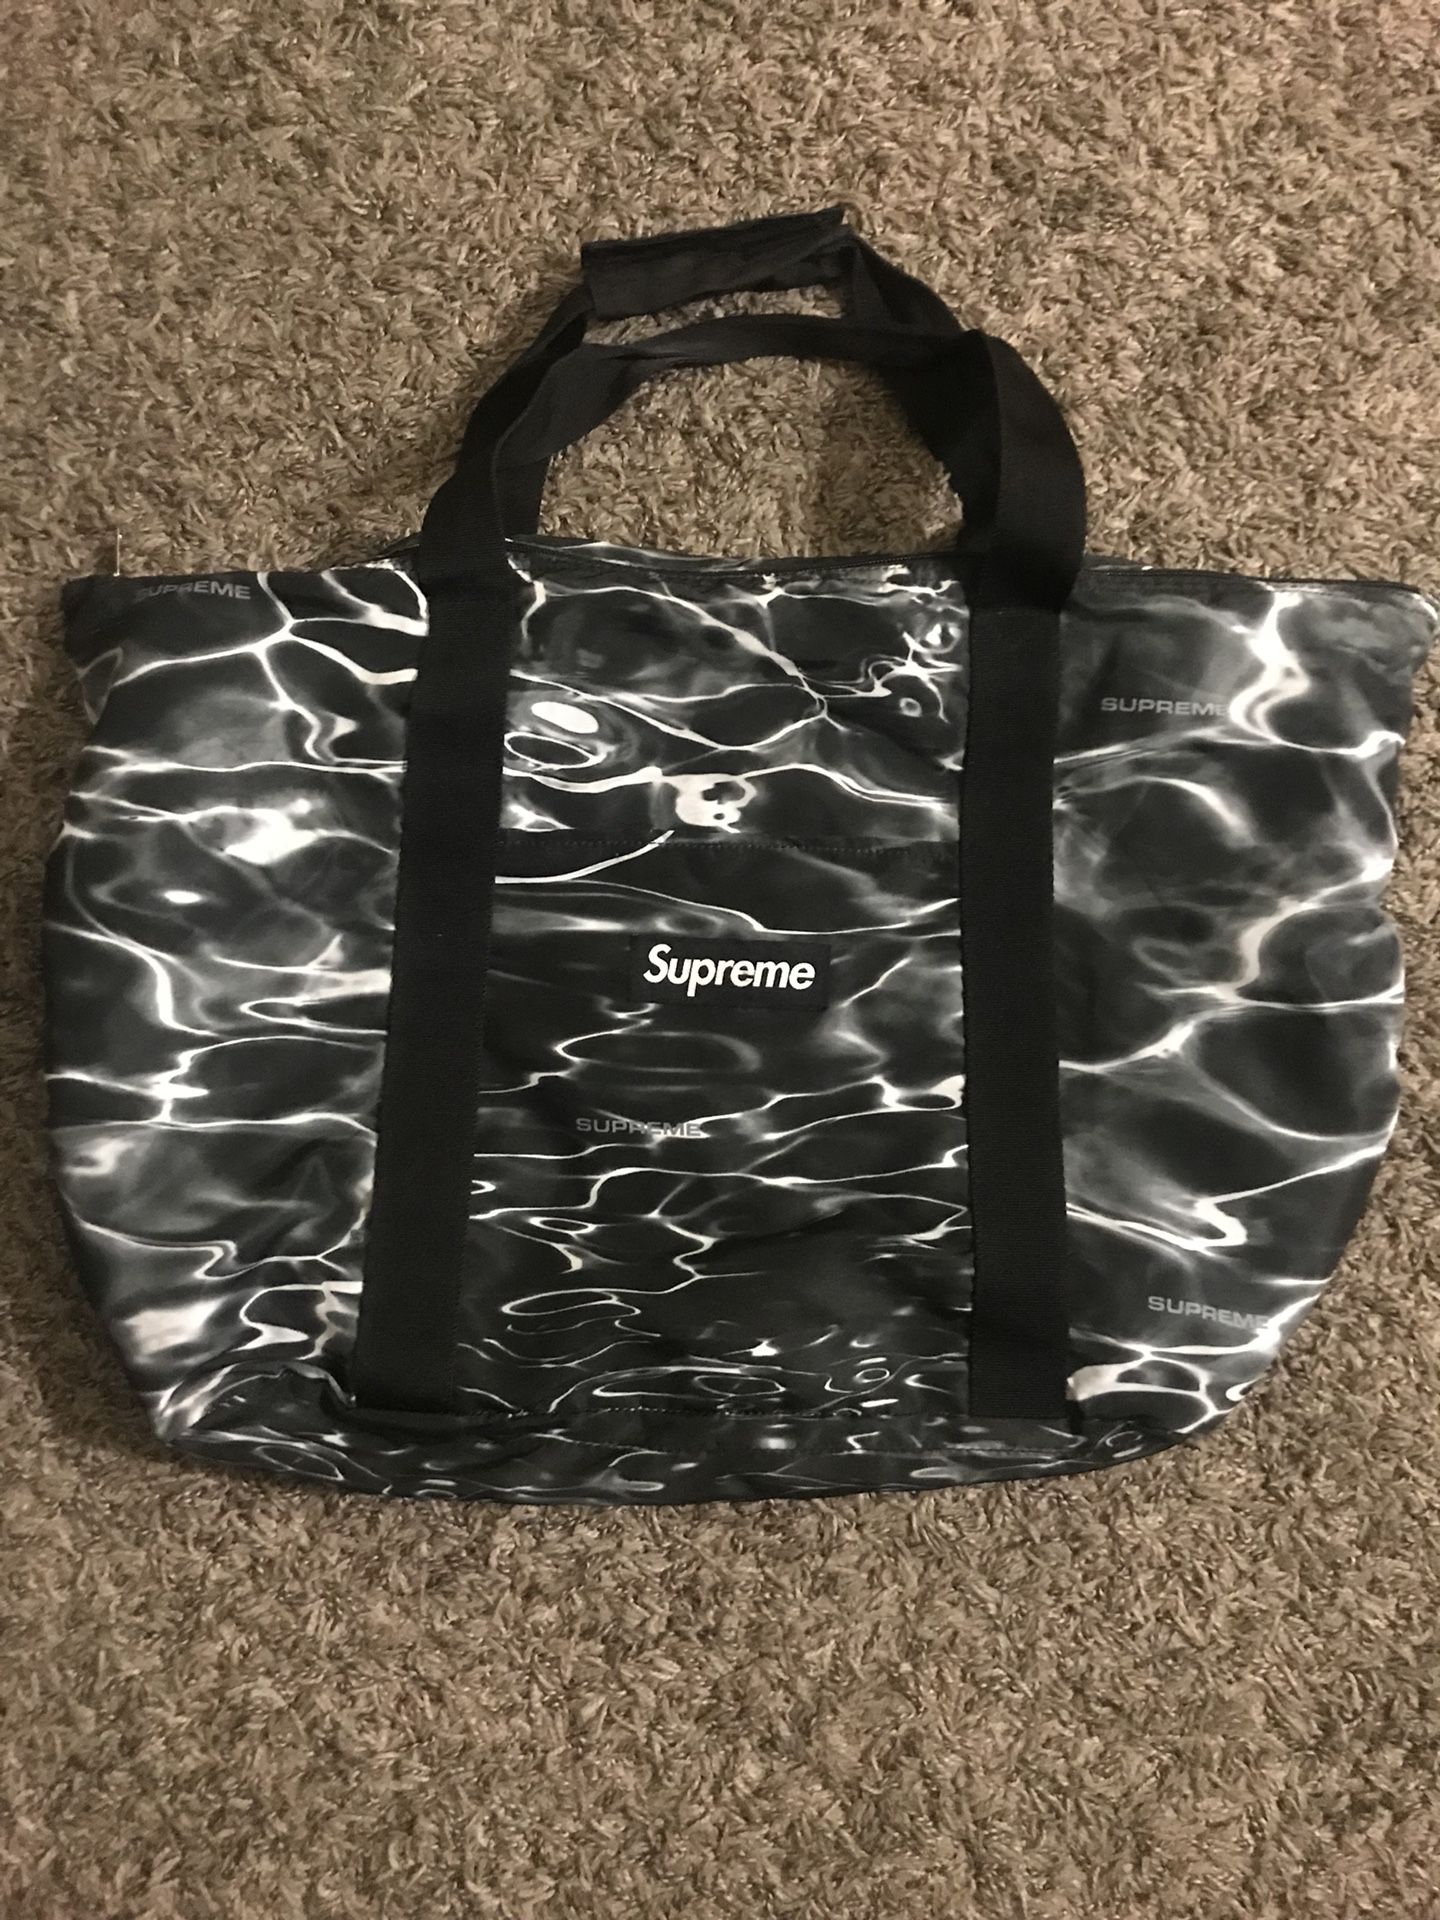 Supreme Ripple Packable Tote Bag Black SS17 for Sale in Fontana, CA -  OfferUp